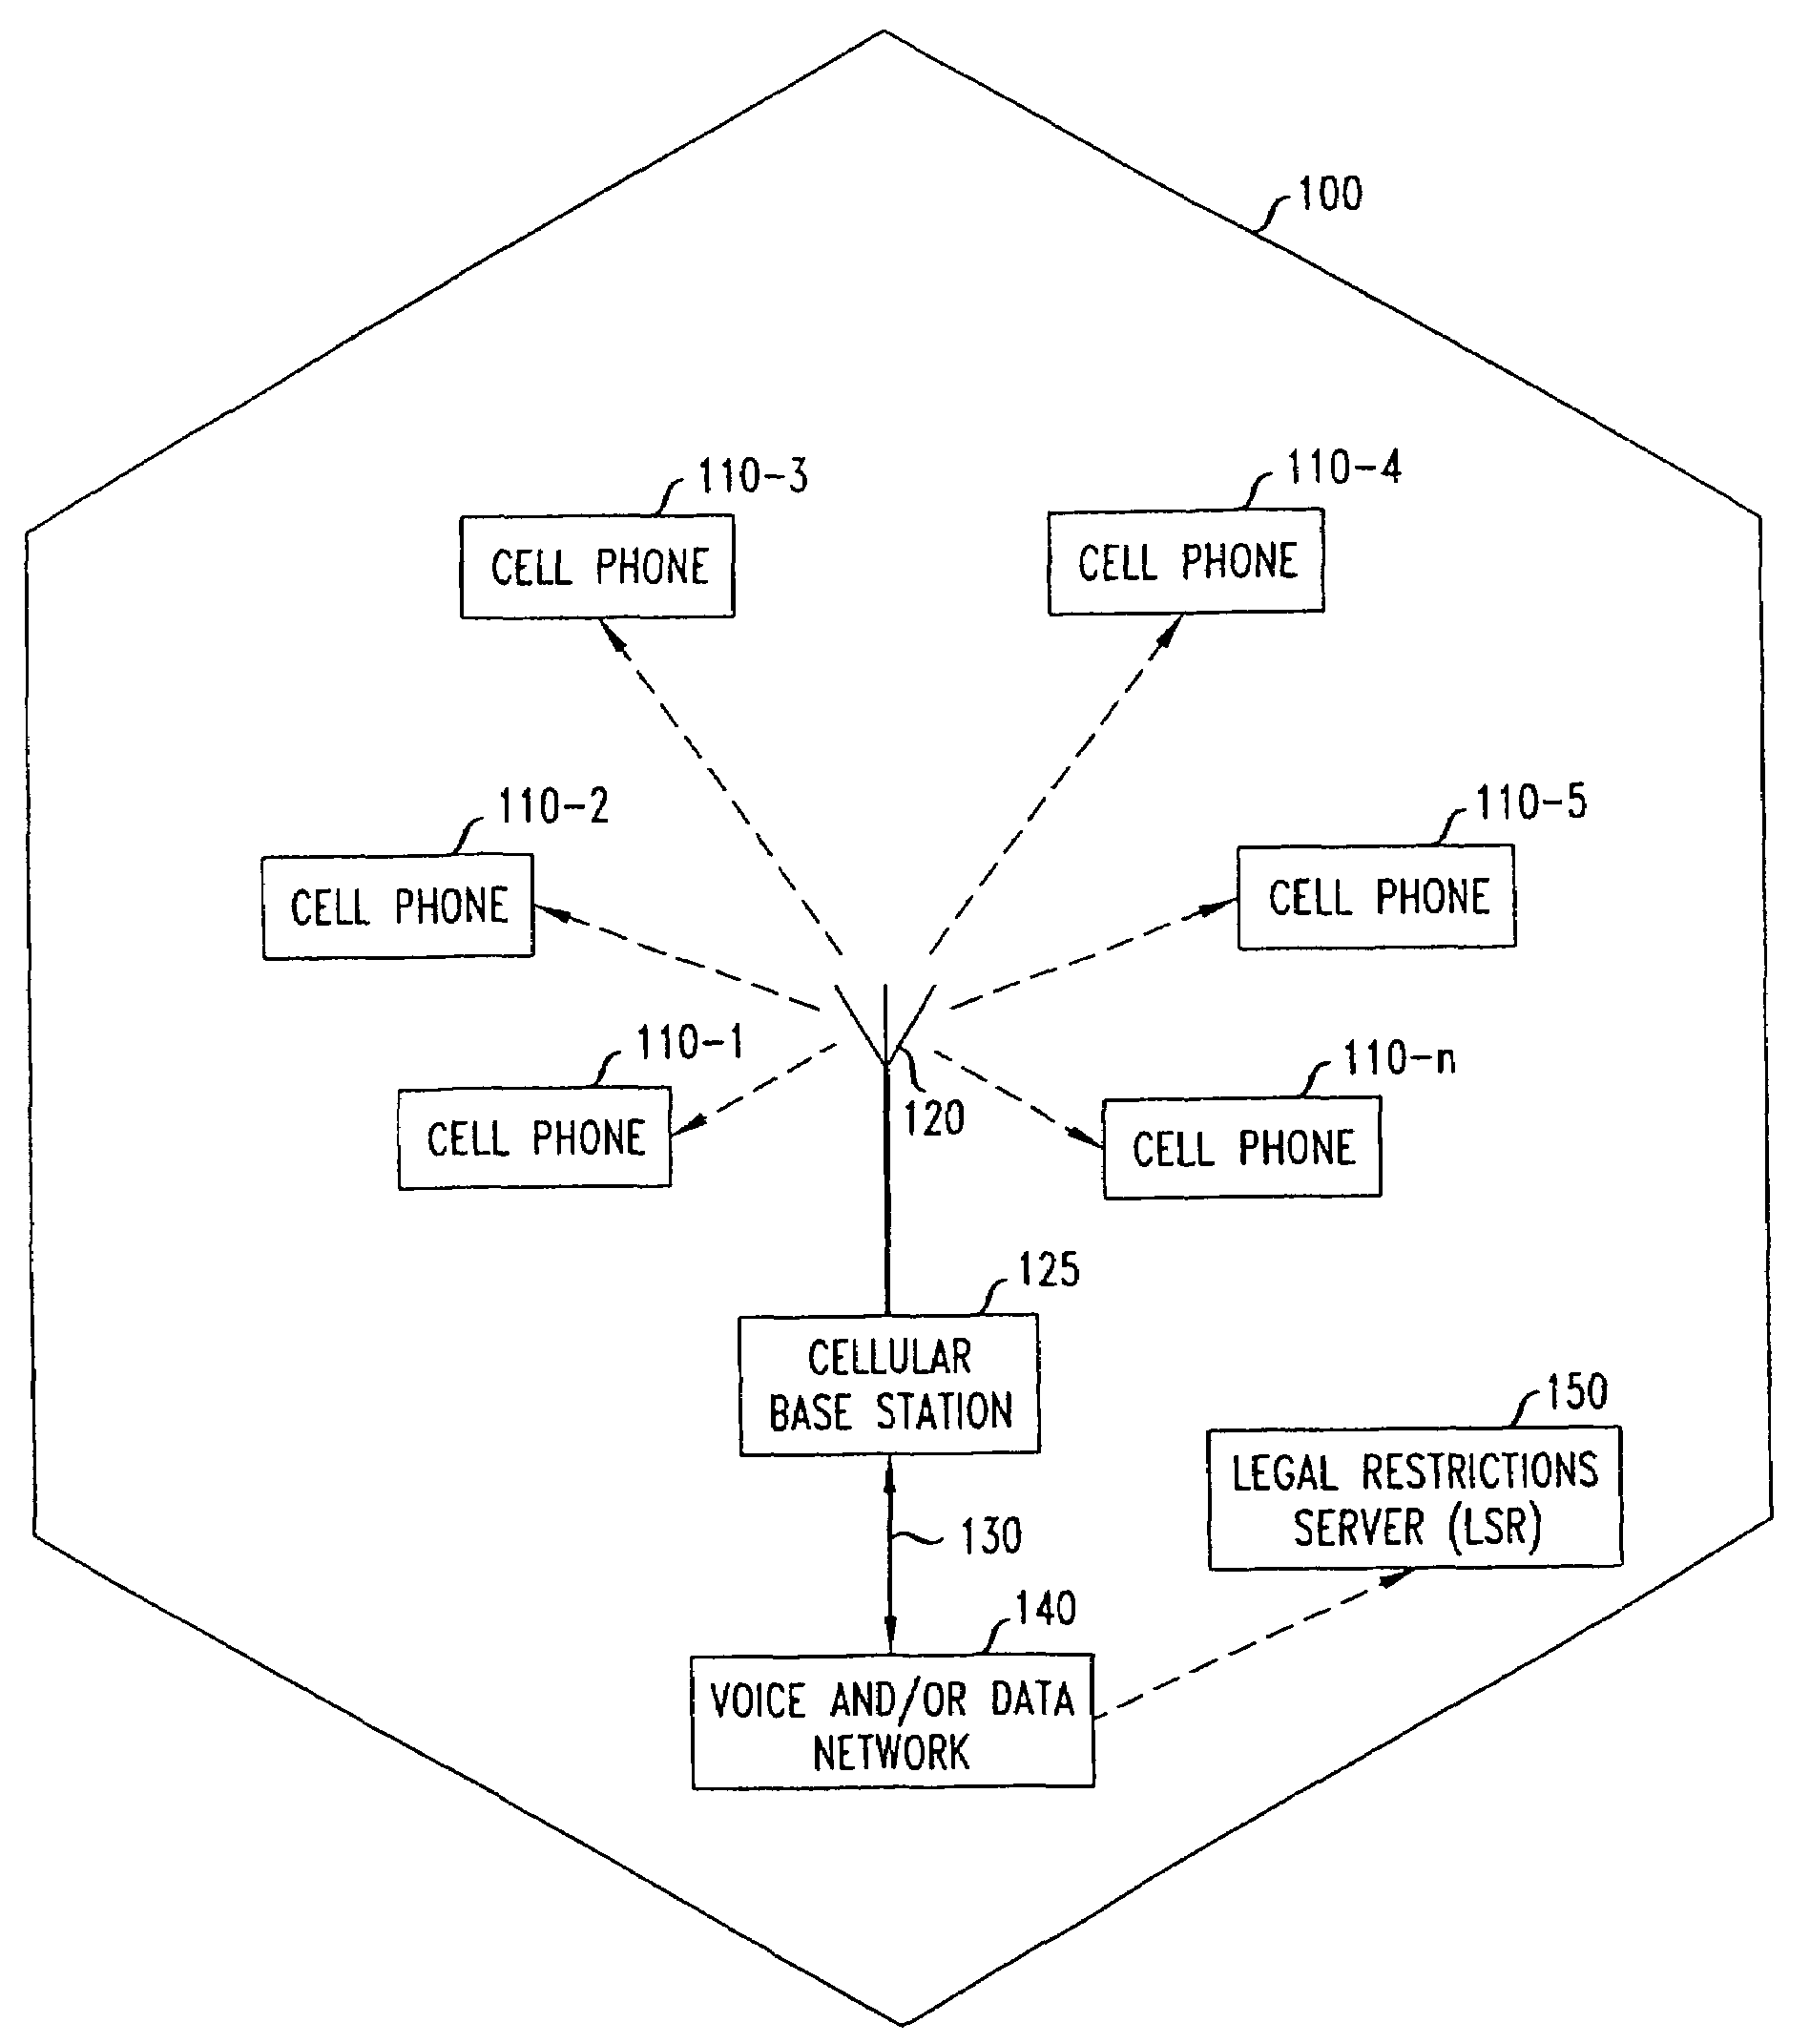 Modification of portable communications device operation in vehicles